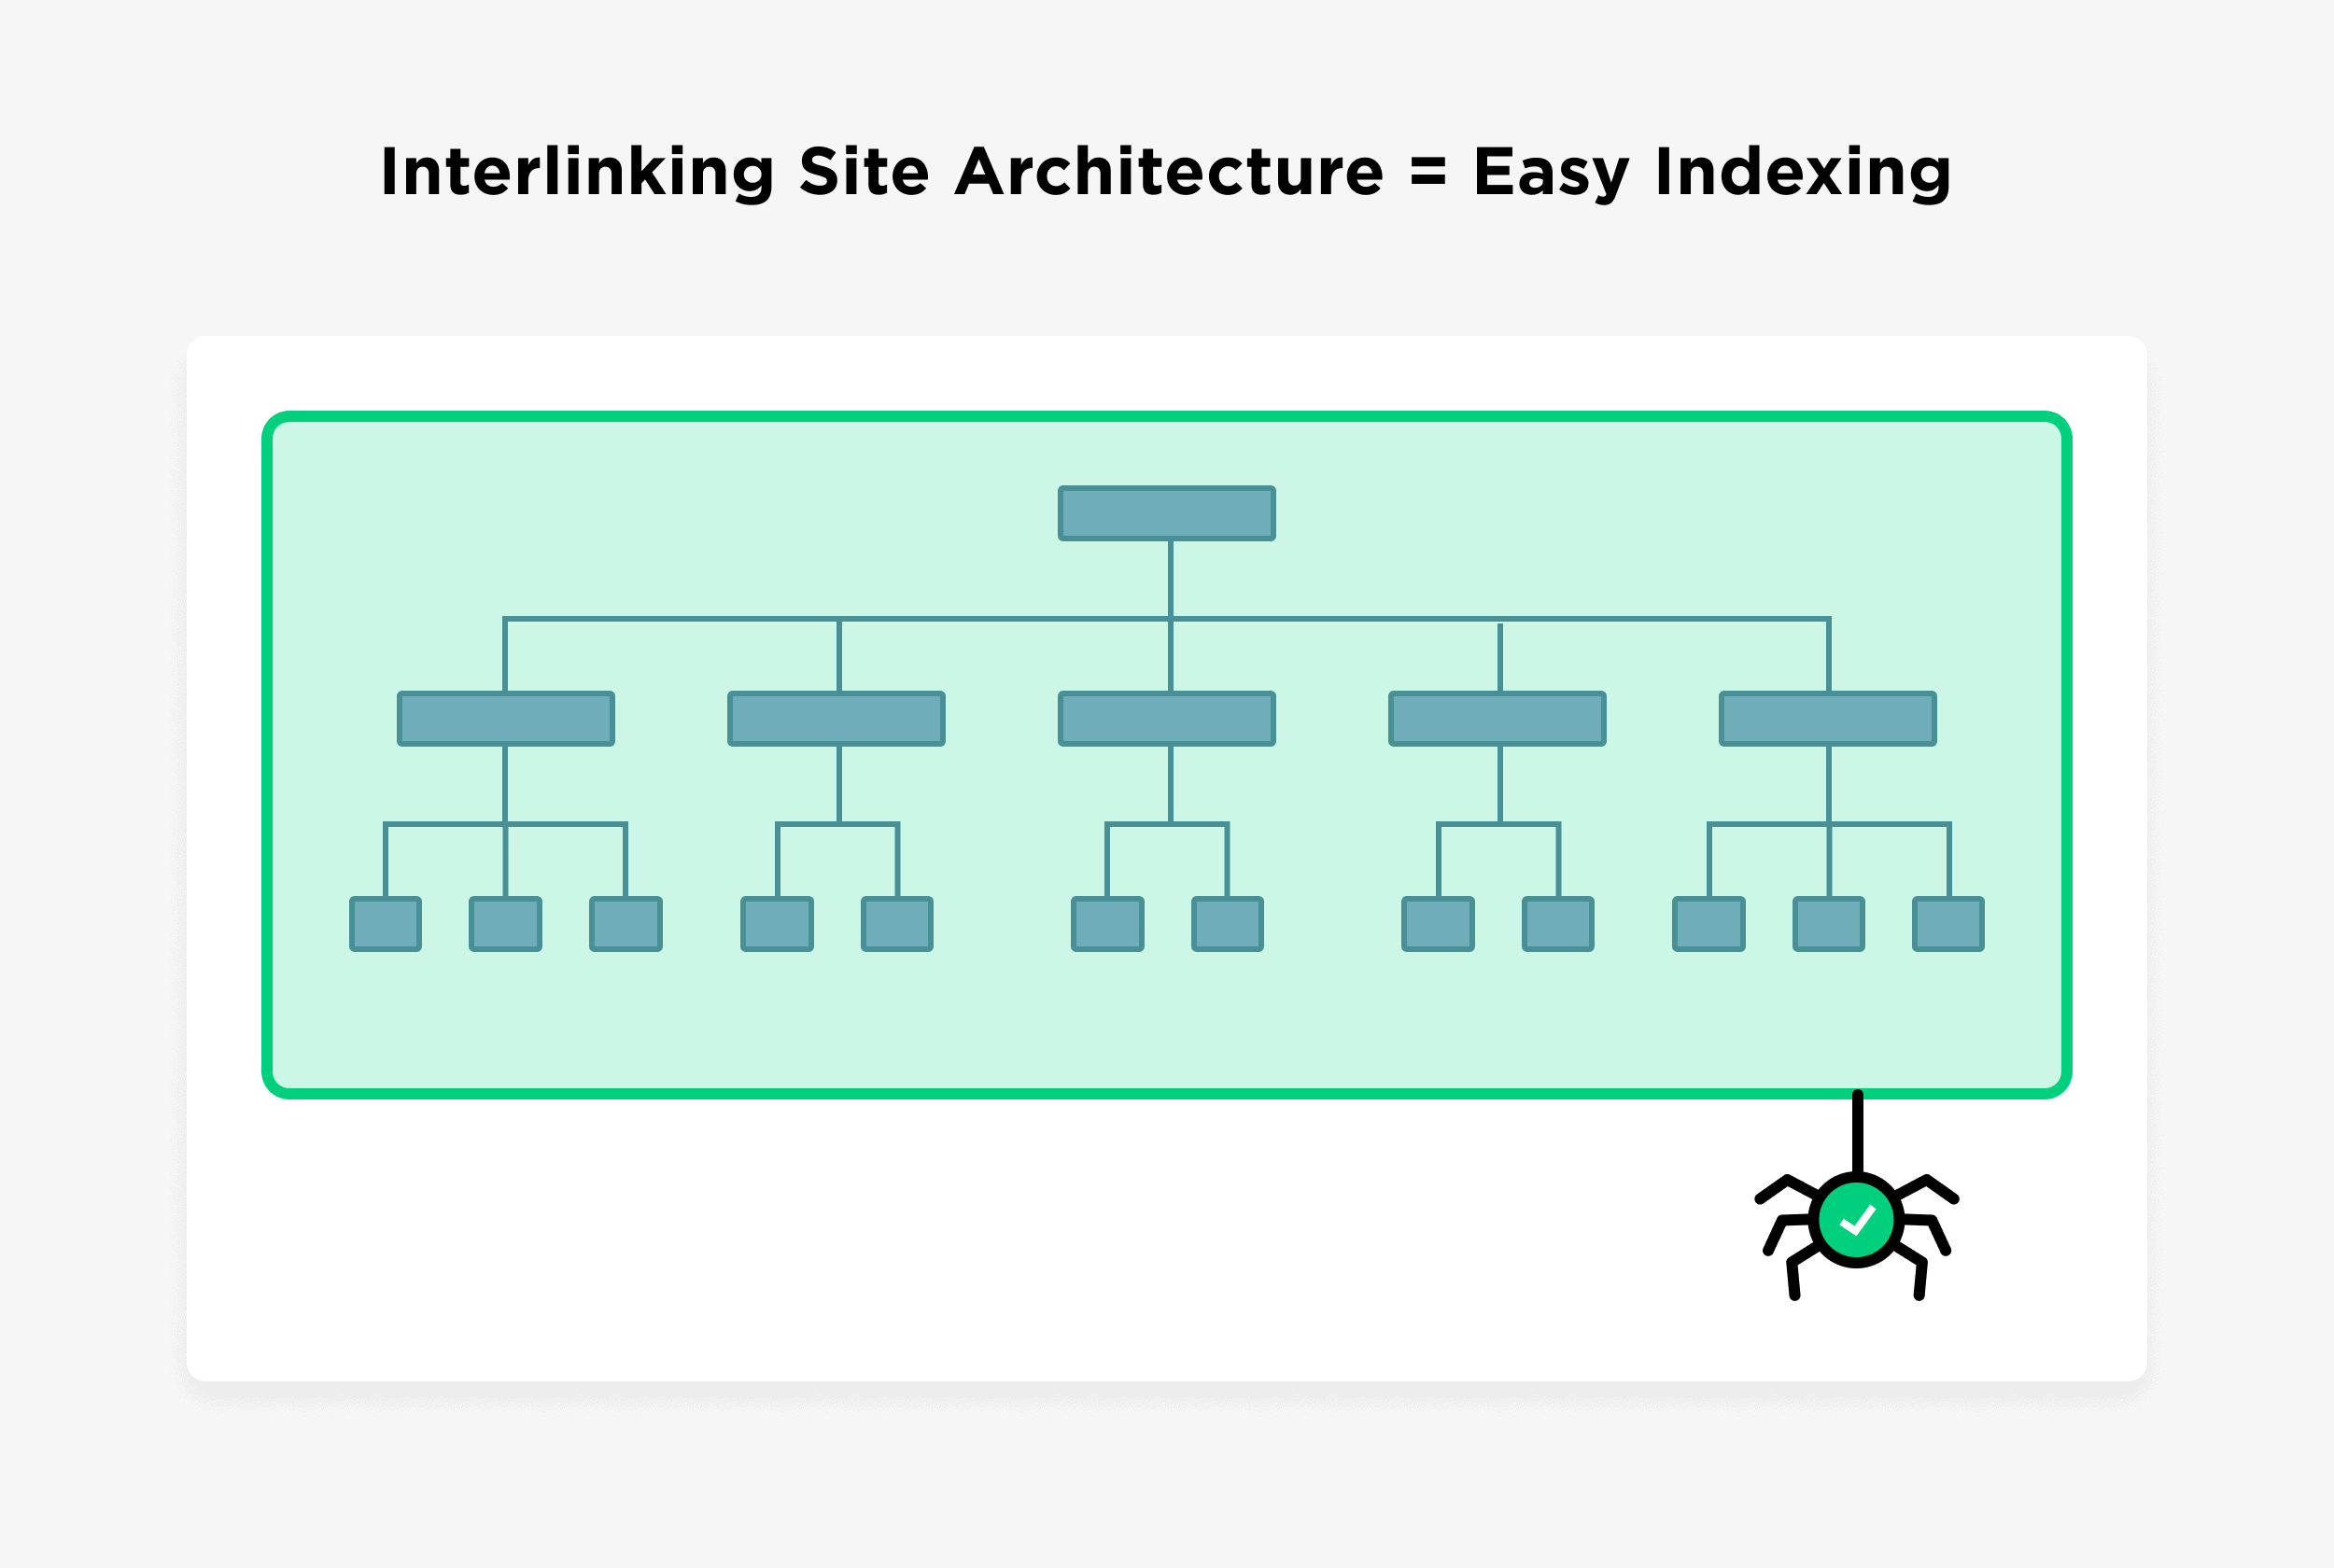 Interlinking Site Architecture Equals Easy Indexing